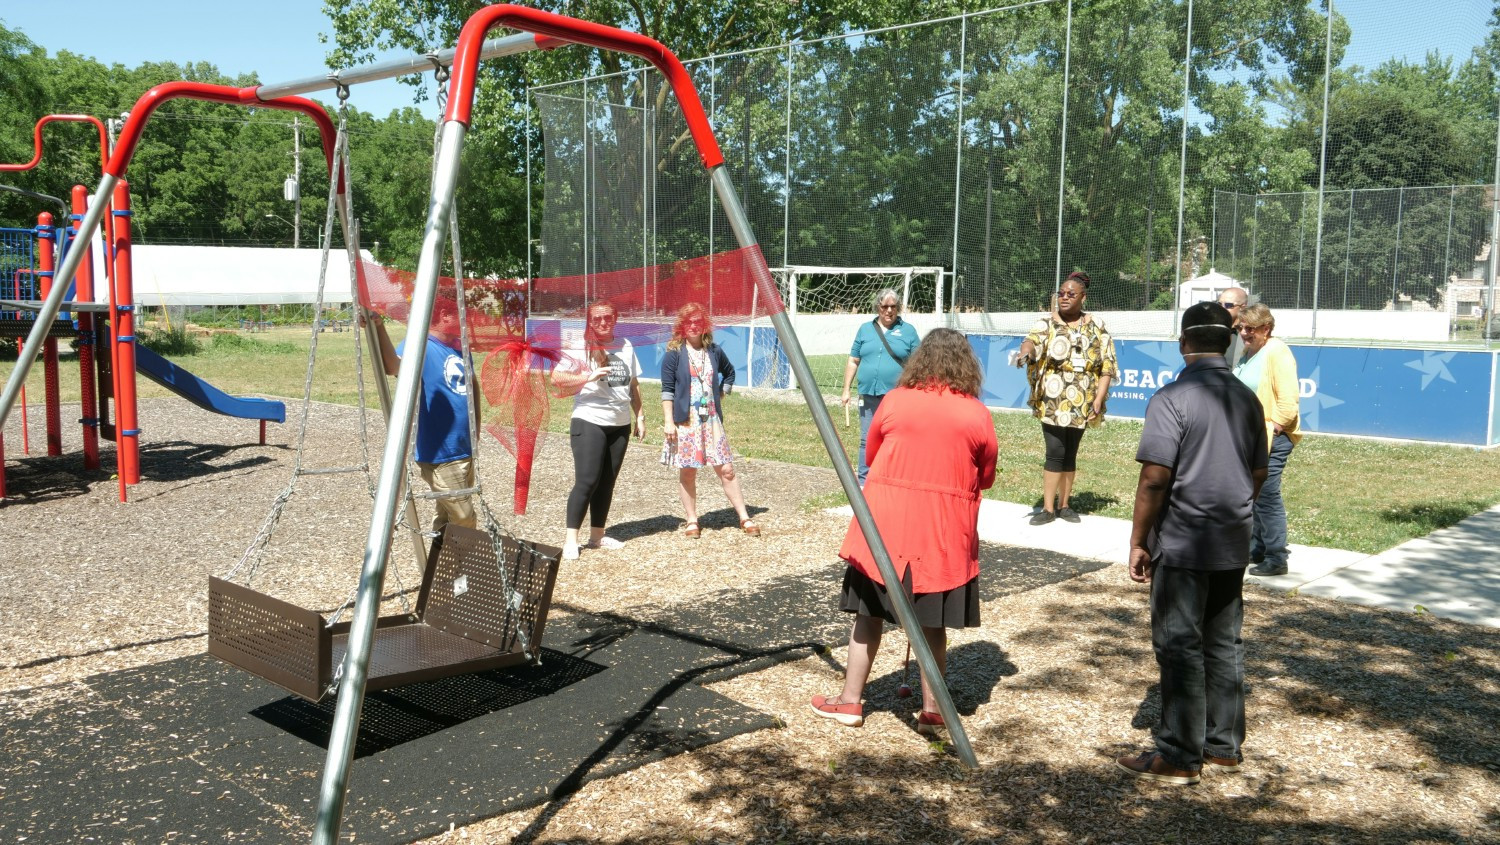 With the City of Lansing, Peckham helped build an accessible park, including the wheelchair swing pictured